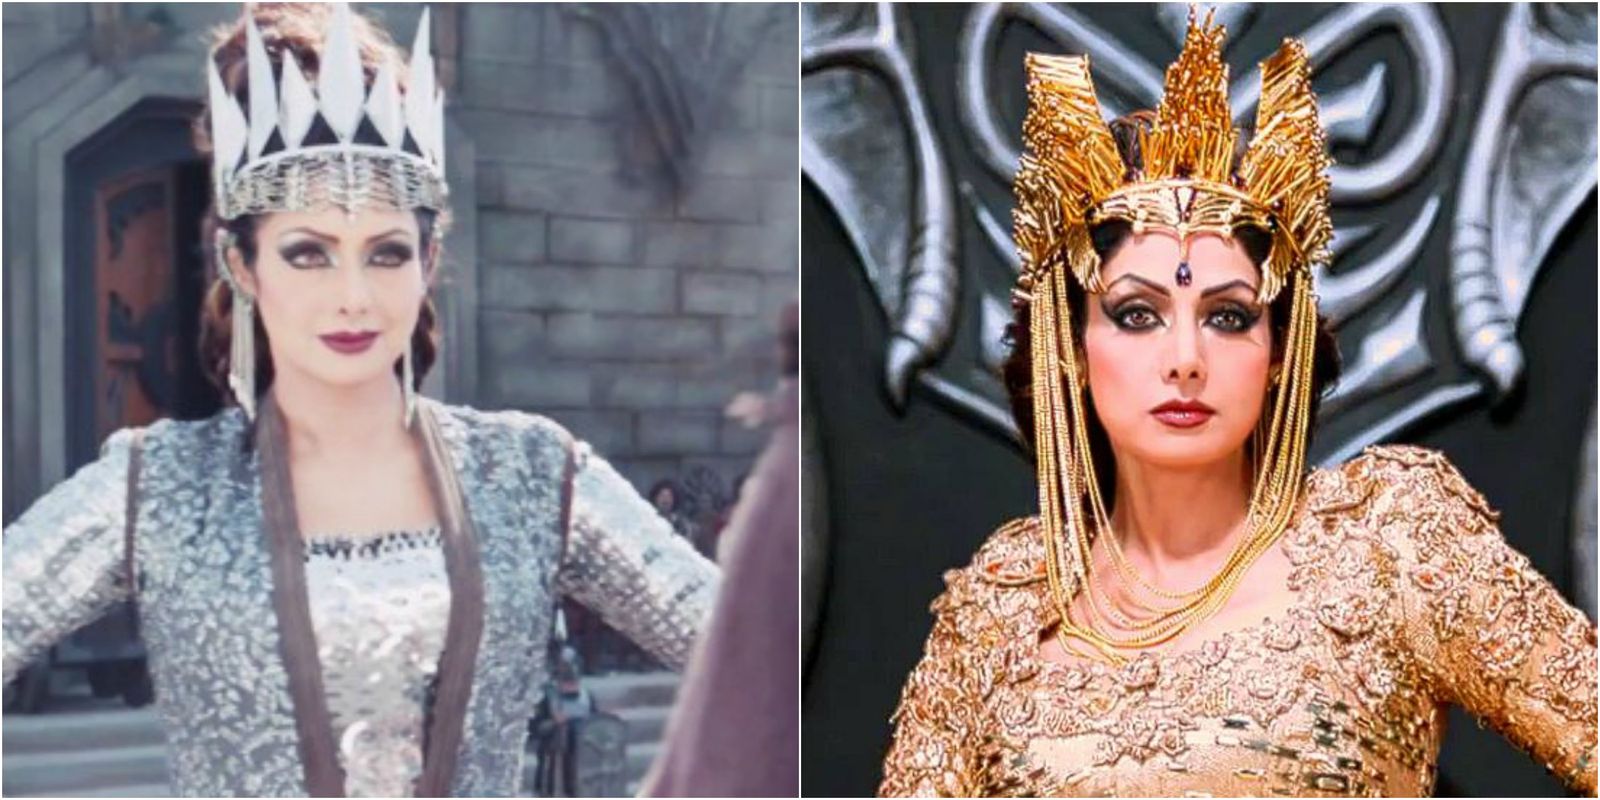 Hairstyles We Can't Believe Sridevi Pulled Off